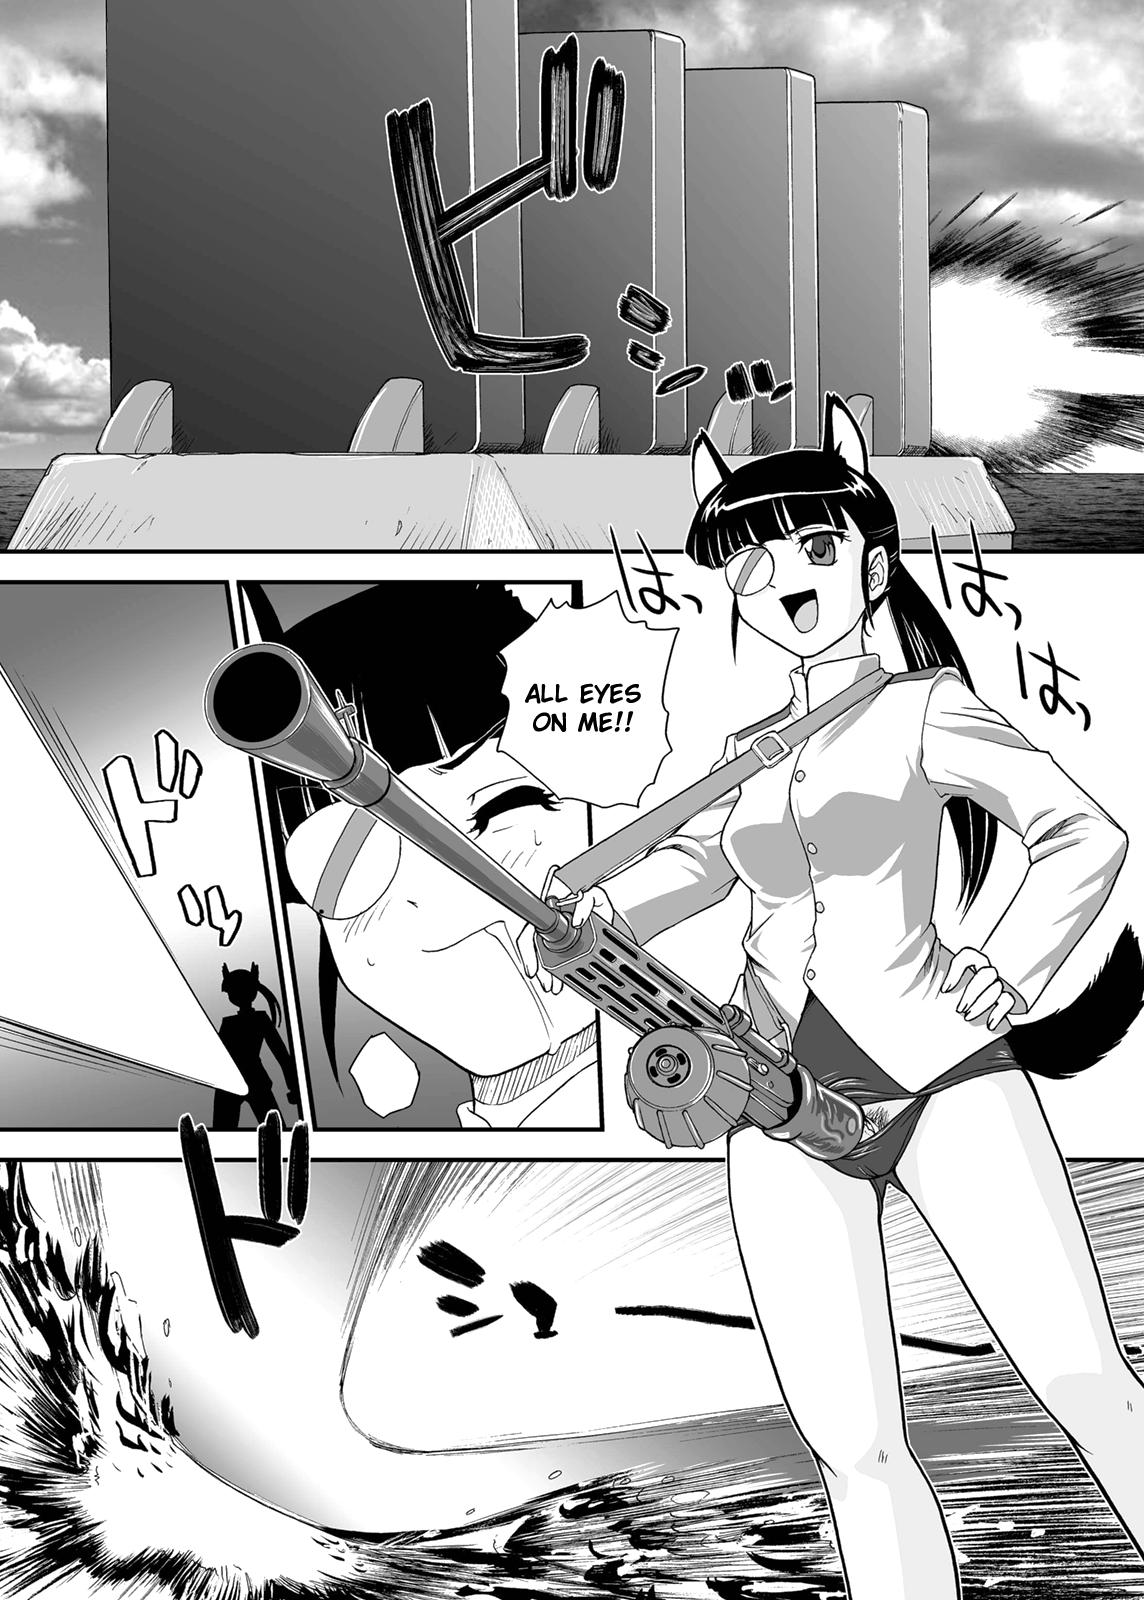 Plump Chin ★ ja Naikara Hazukashiku Naimon!!! | It's Not A Real Dick, So There's Nothing to Be Embarrassed About!!! - Strike witches Fantasy Massage - Page 5